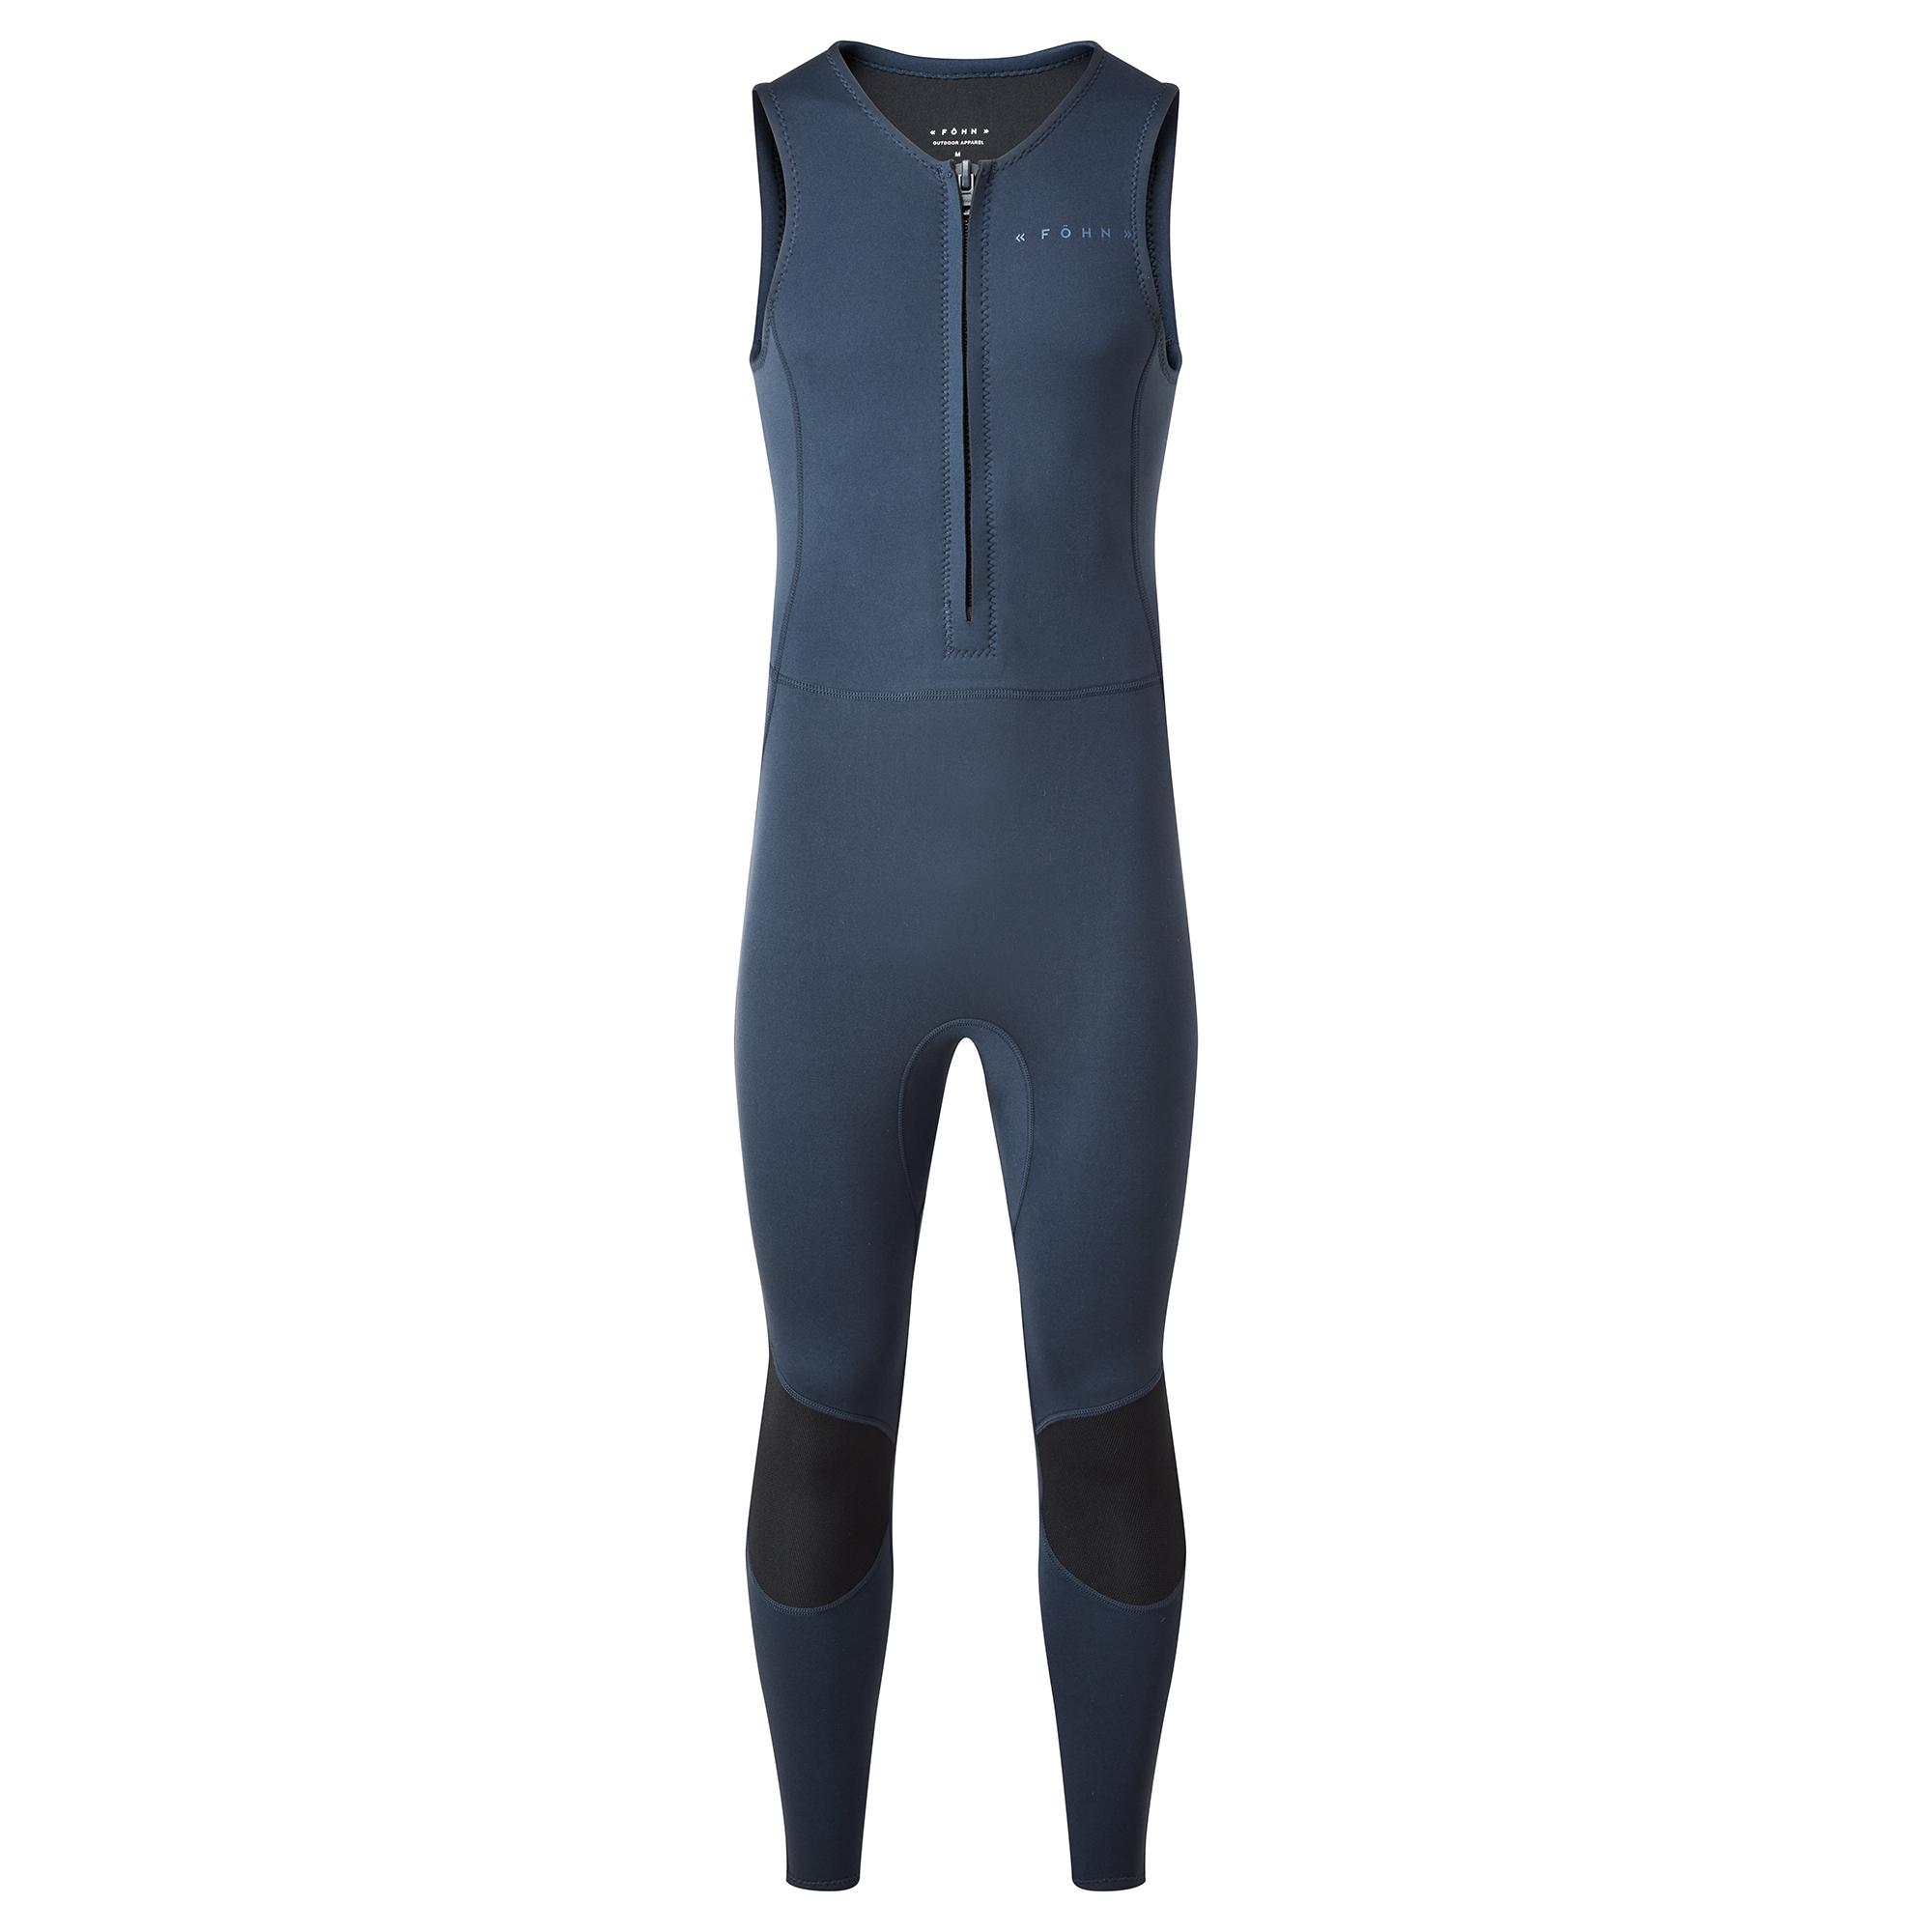 Fhn 2mm Sleeveless Wetsuit - Navy